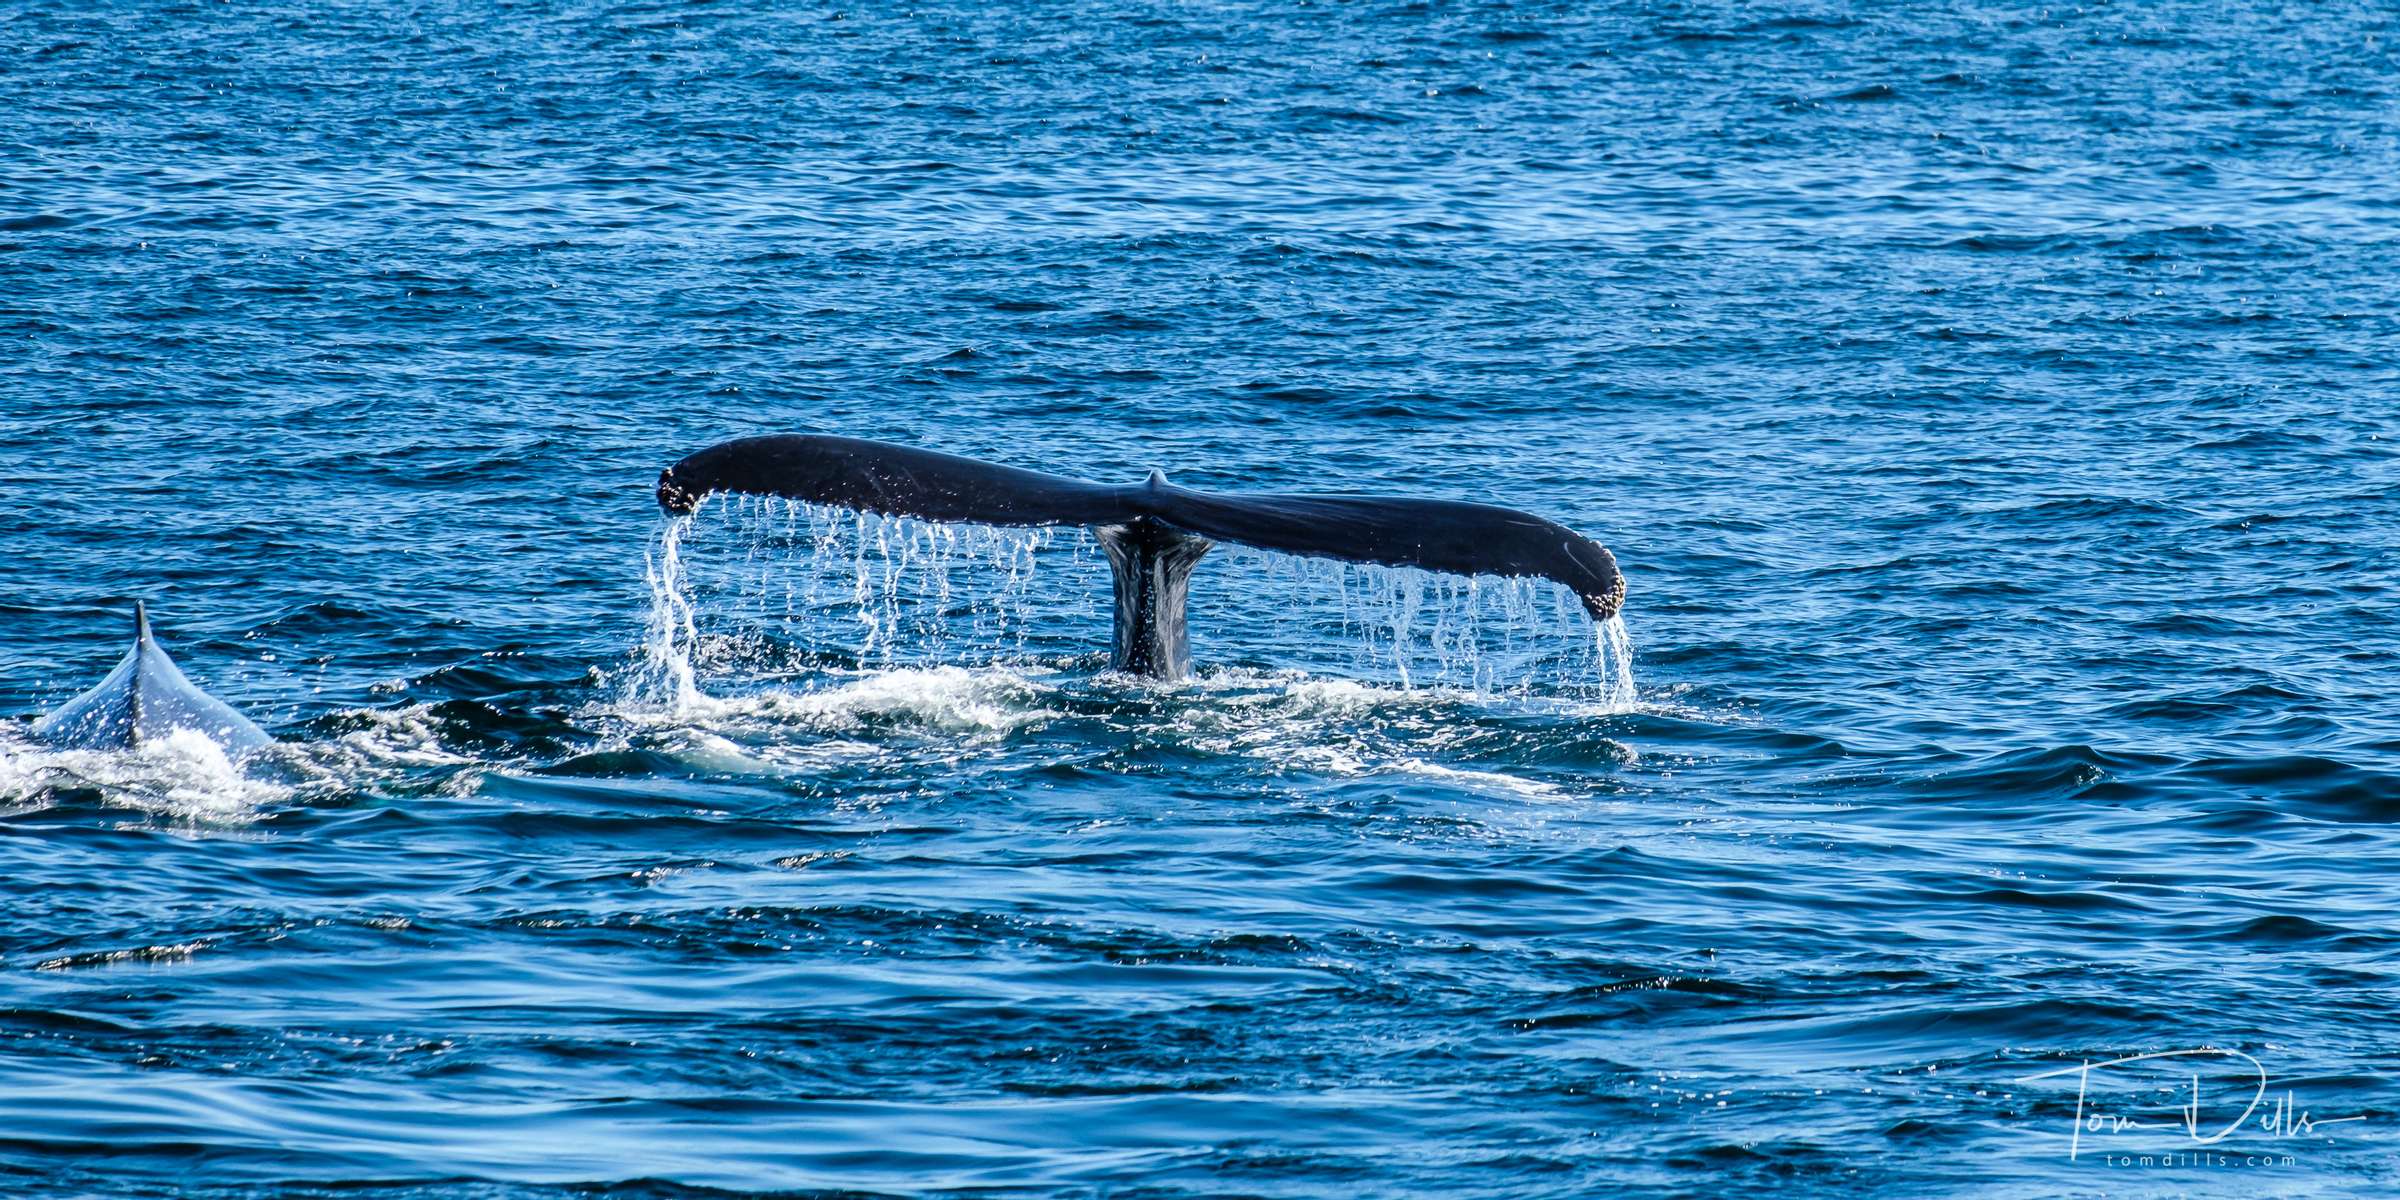 Humpback Whale seen on our Whale Watch Cruise with Cape Ann Whale Watch in Gloucester, Massachusetts